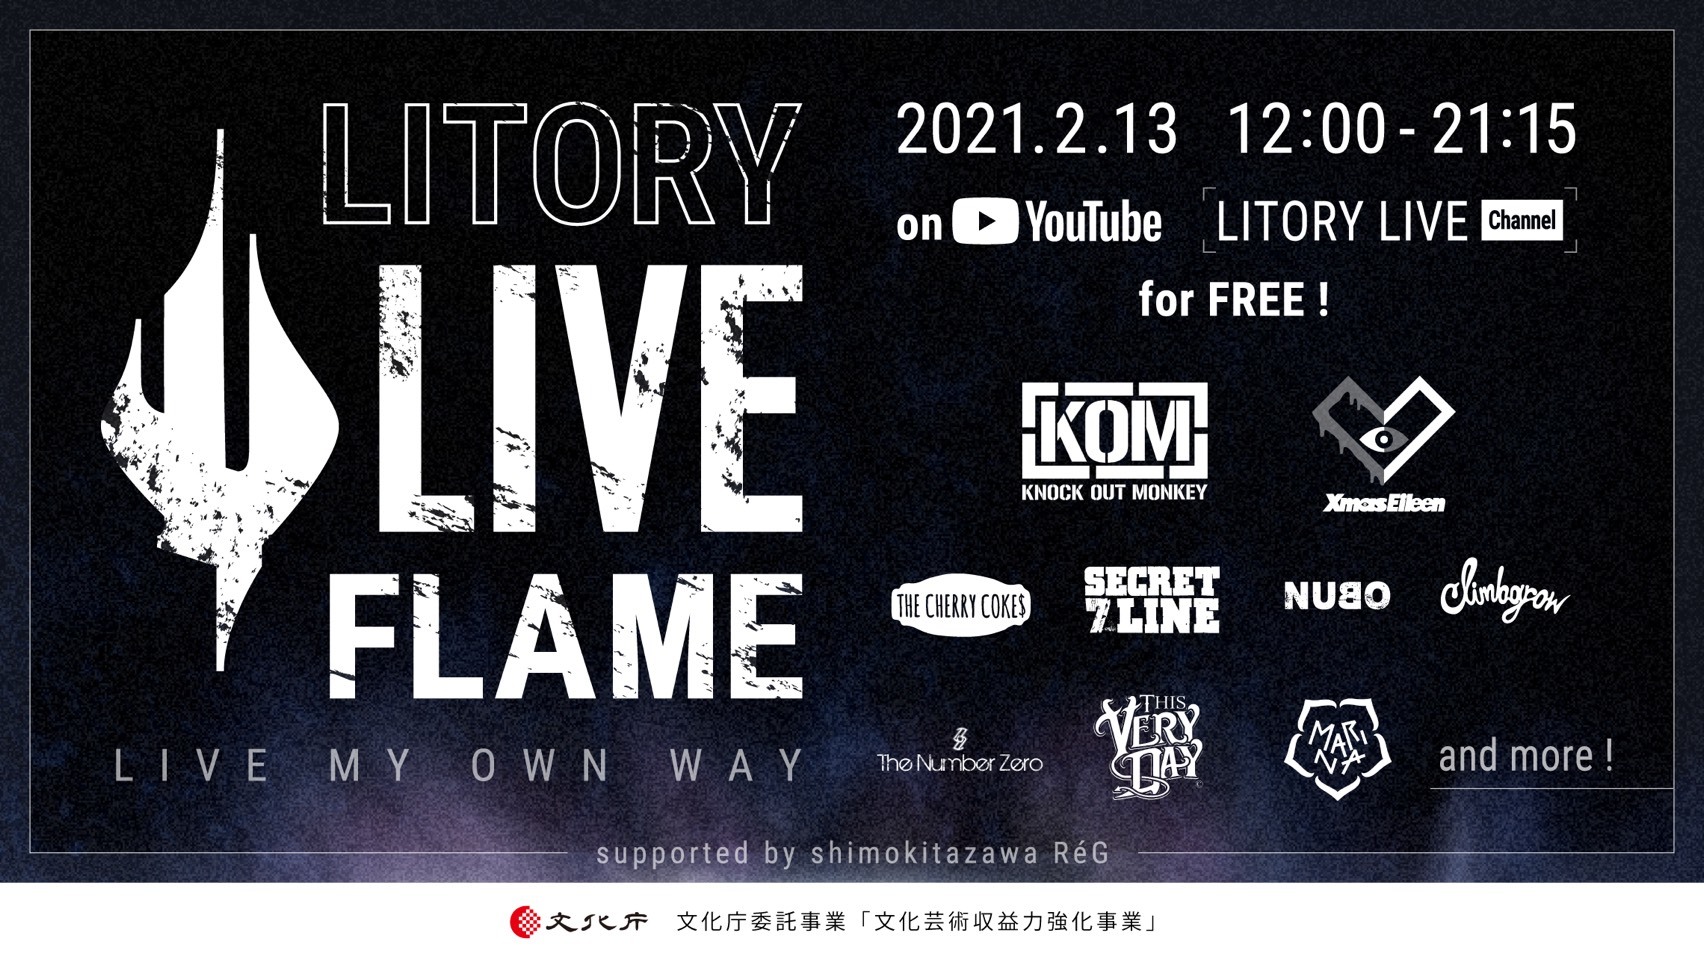 LITORY LIVE FLAME 〜Live my own way〜